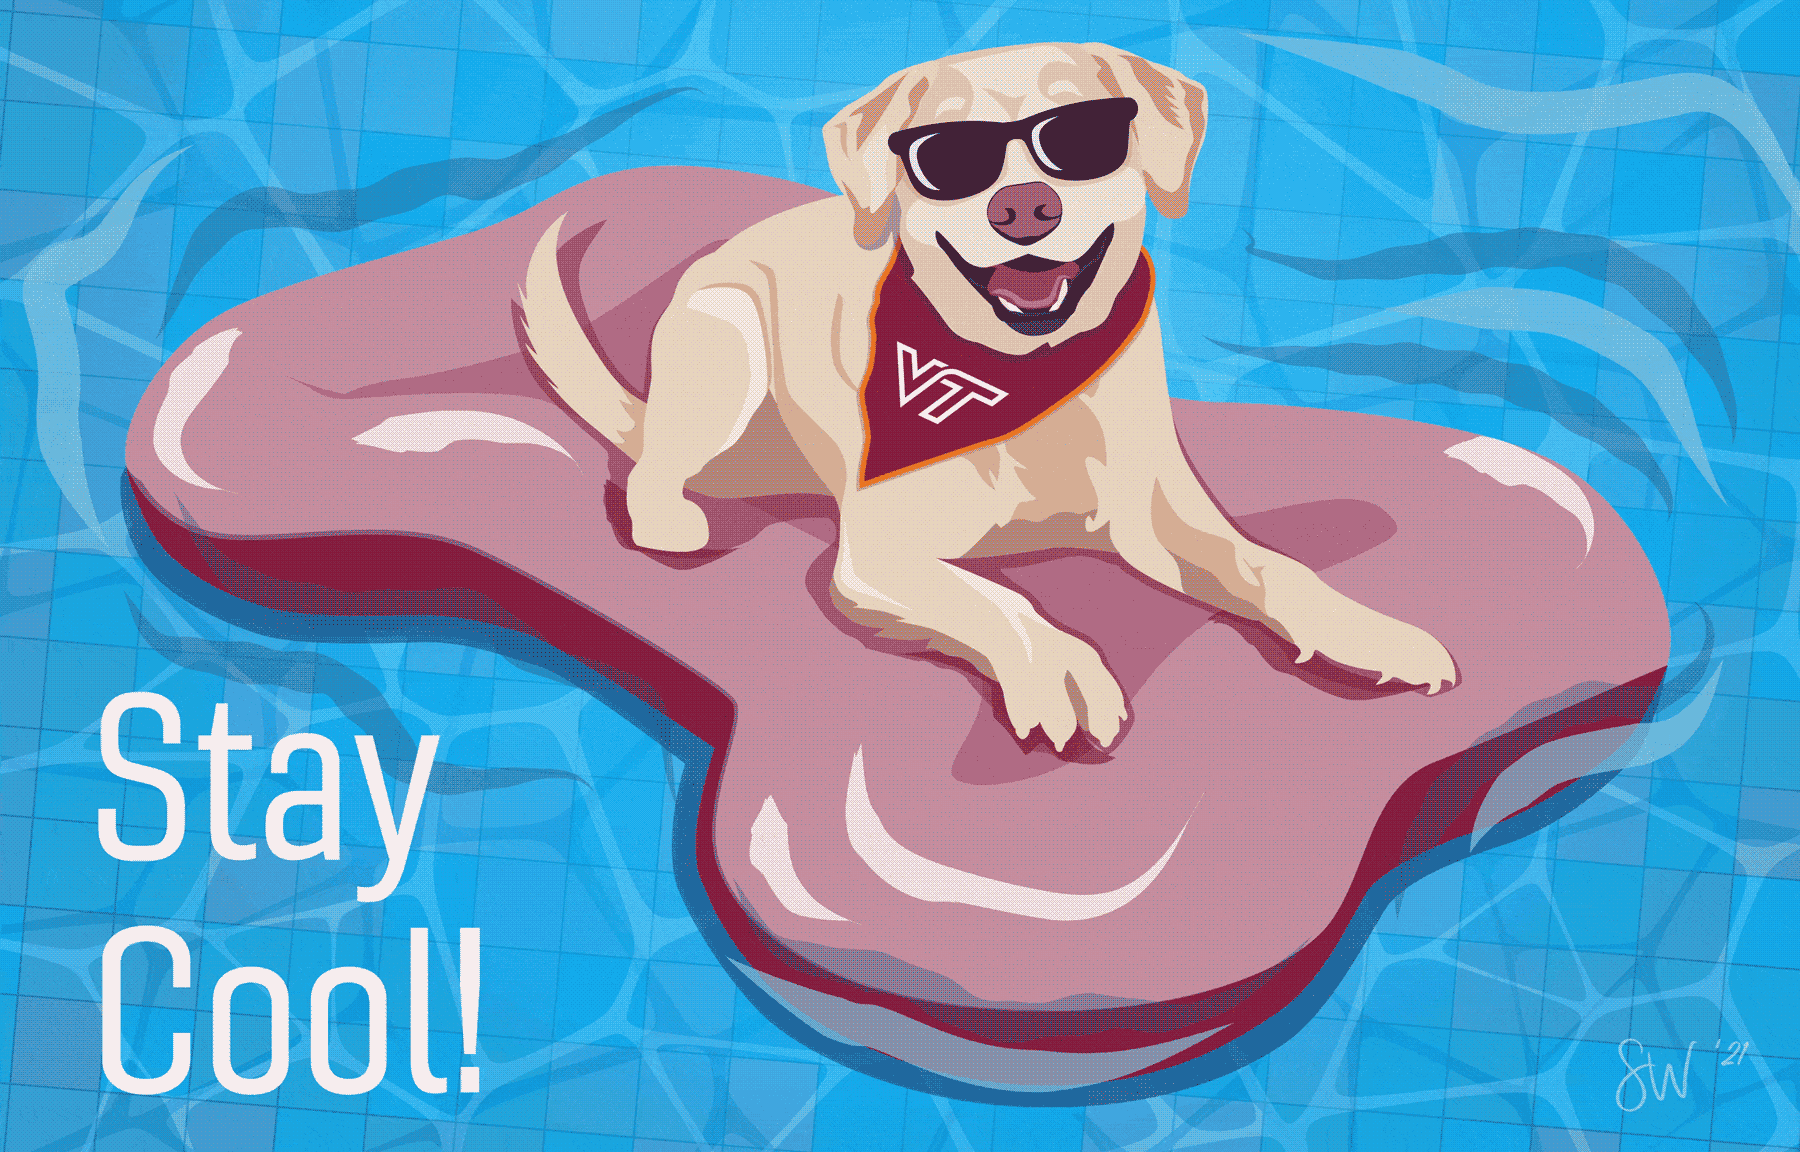 Animated therapy dog on raft